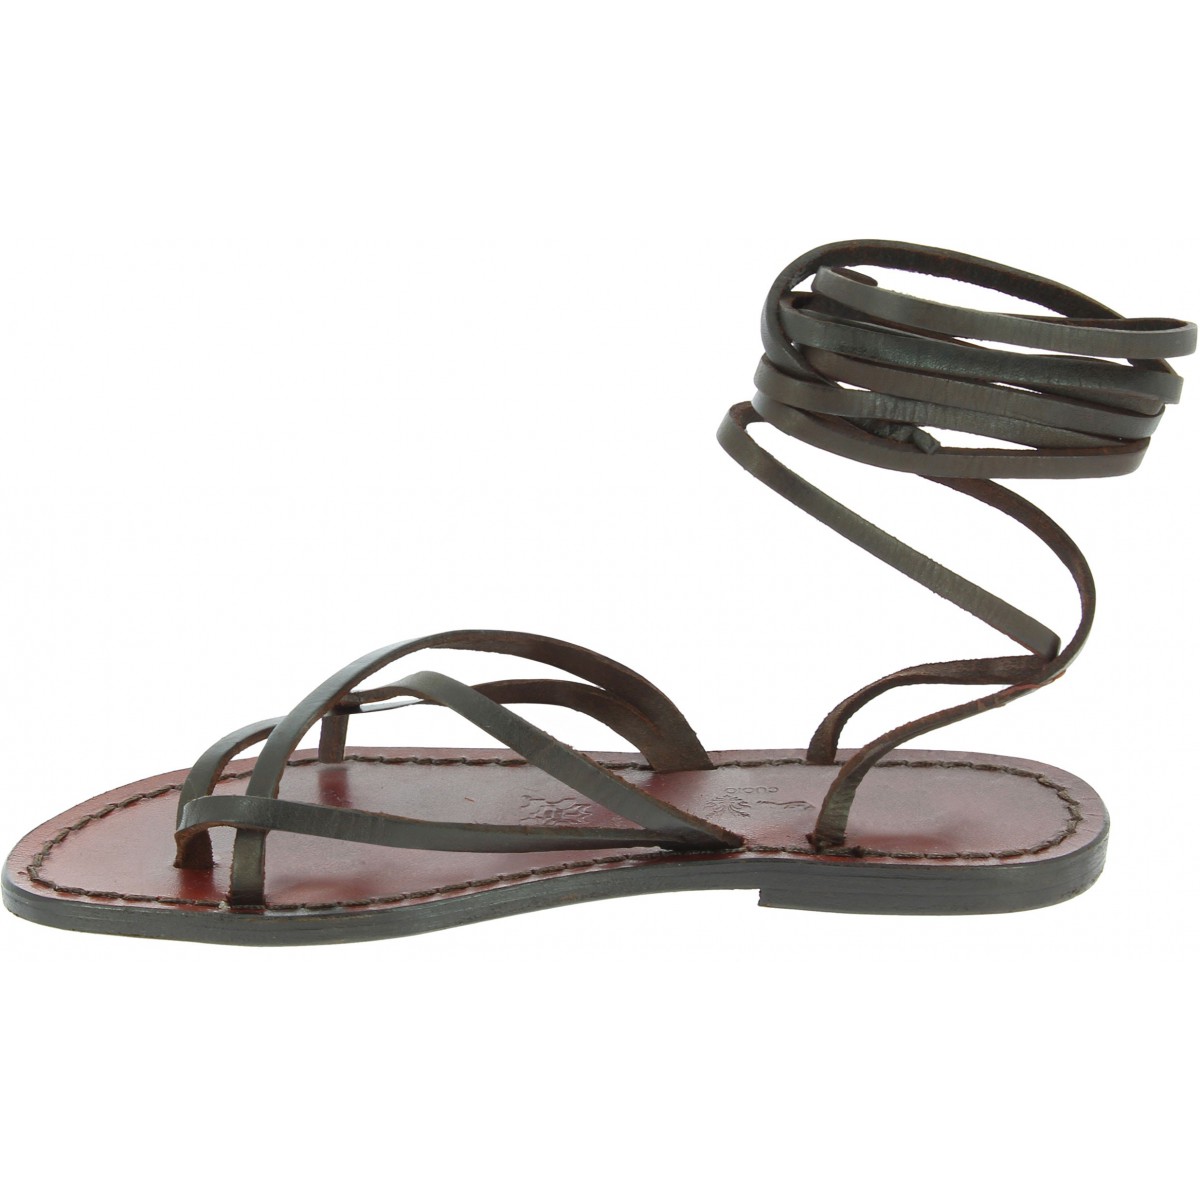 Womens strappy leather sandals Handmade in Italy in dark brown cuir ...